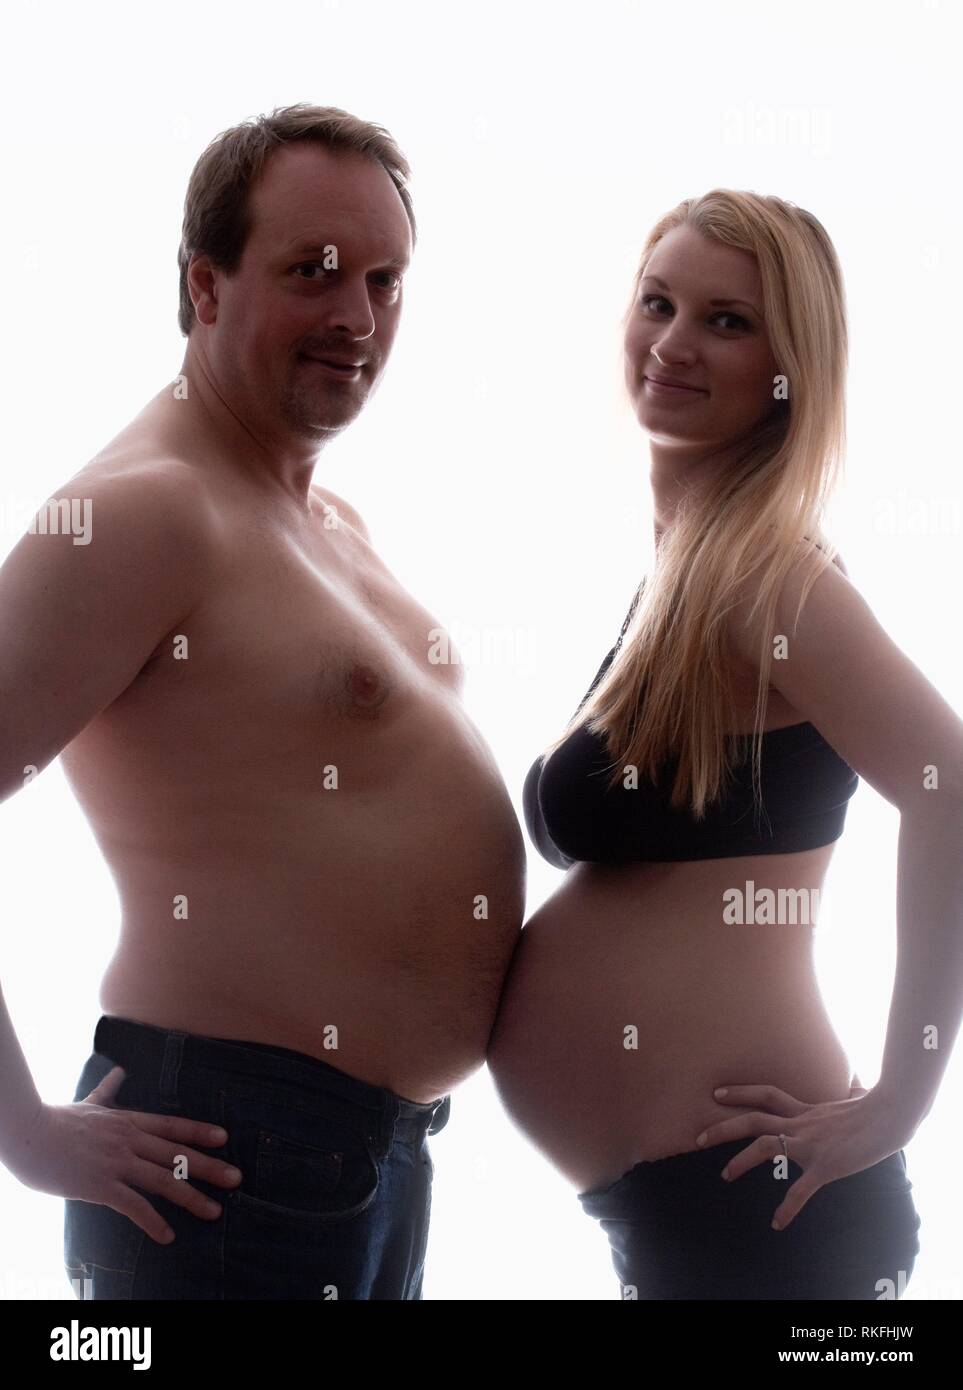 Pregnant Woman and her Partner Measuring Bellies. Stock Photo